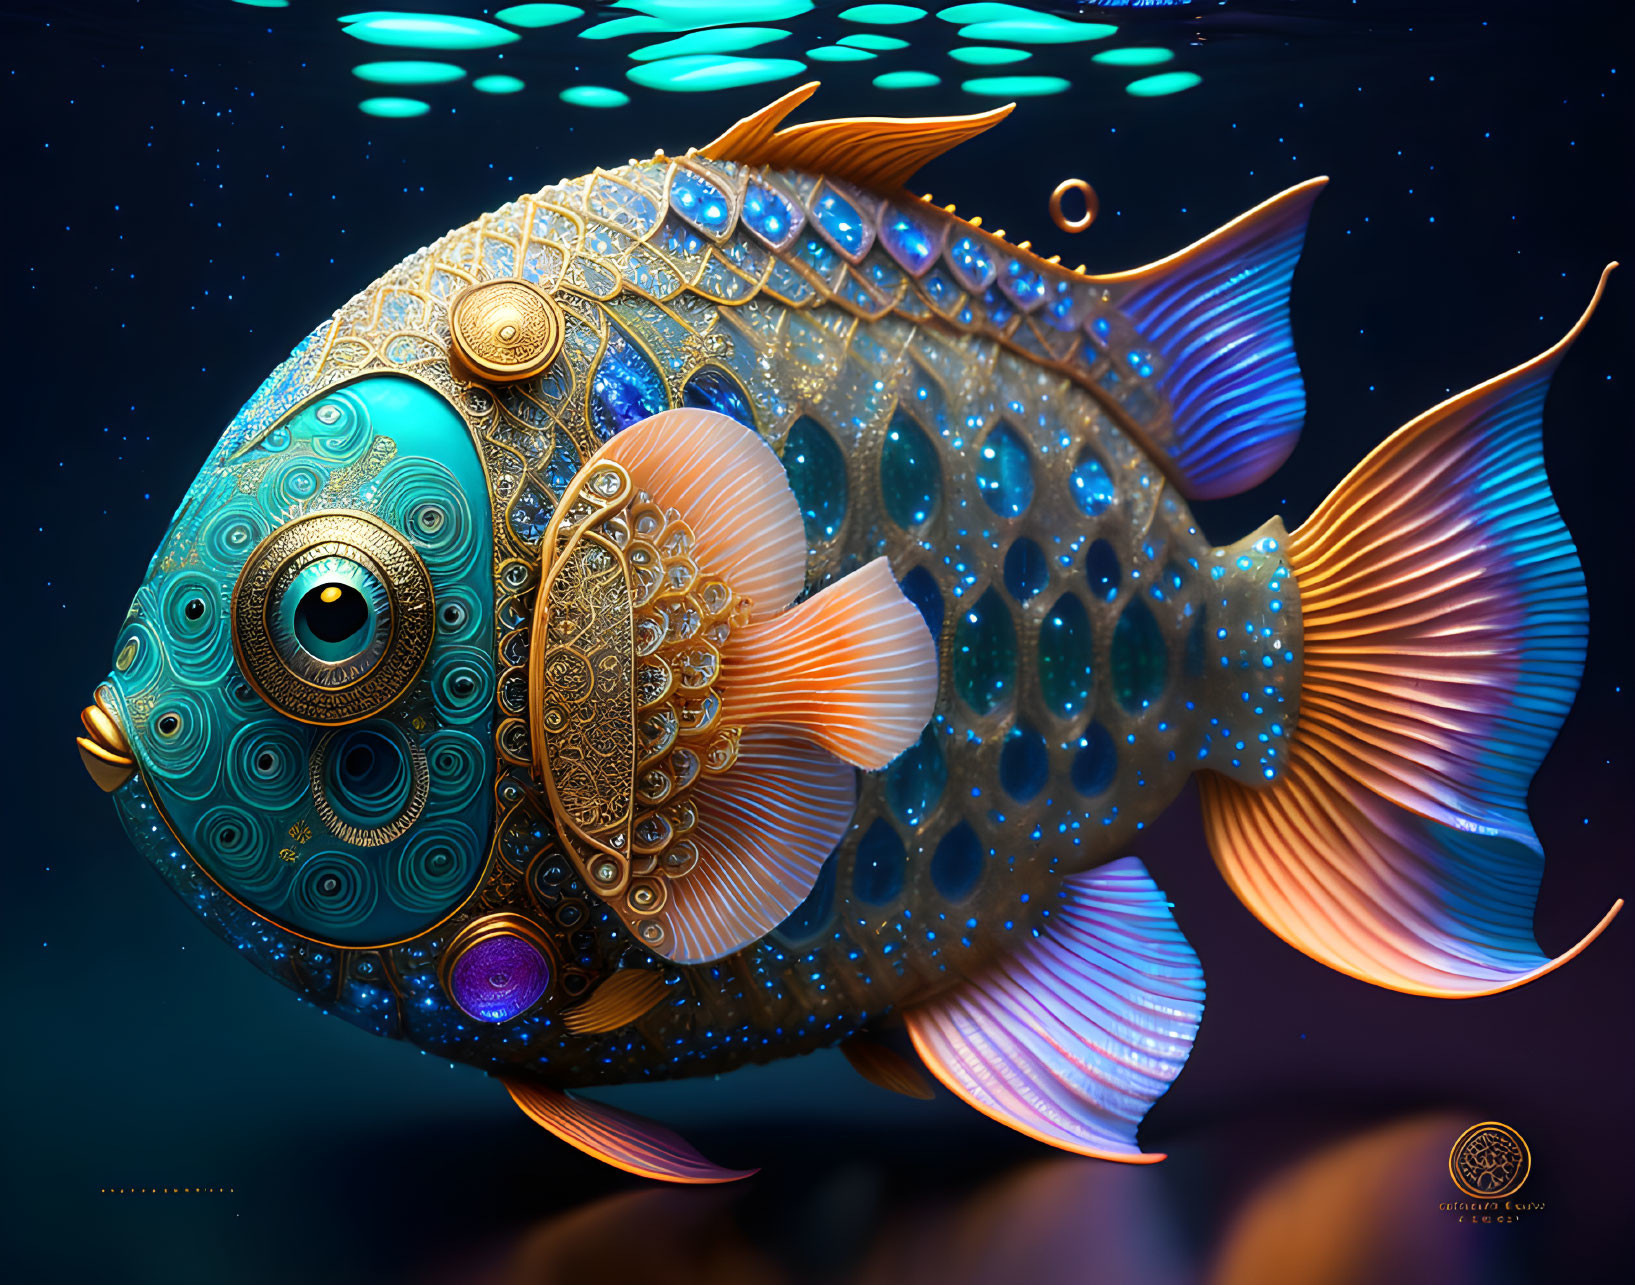 Colorful digital artwork of stylized fish with intricate patterns and gold accents on a dark, bubble-spe